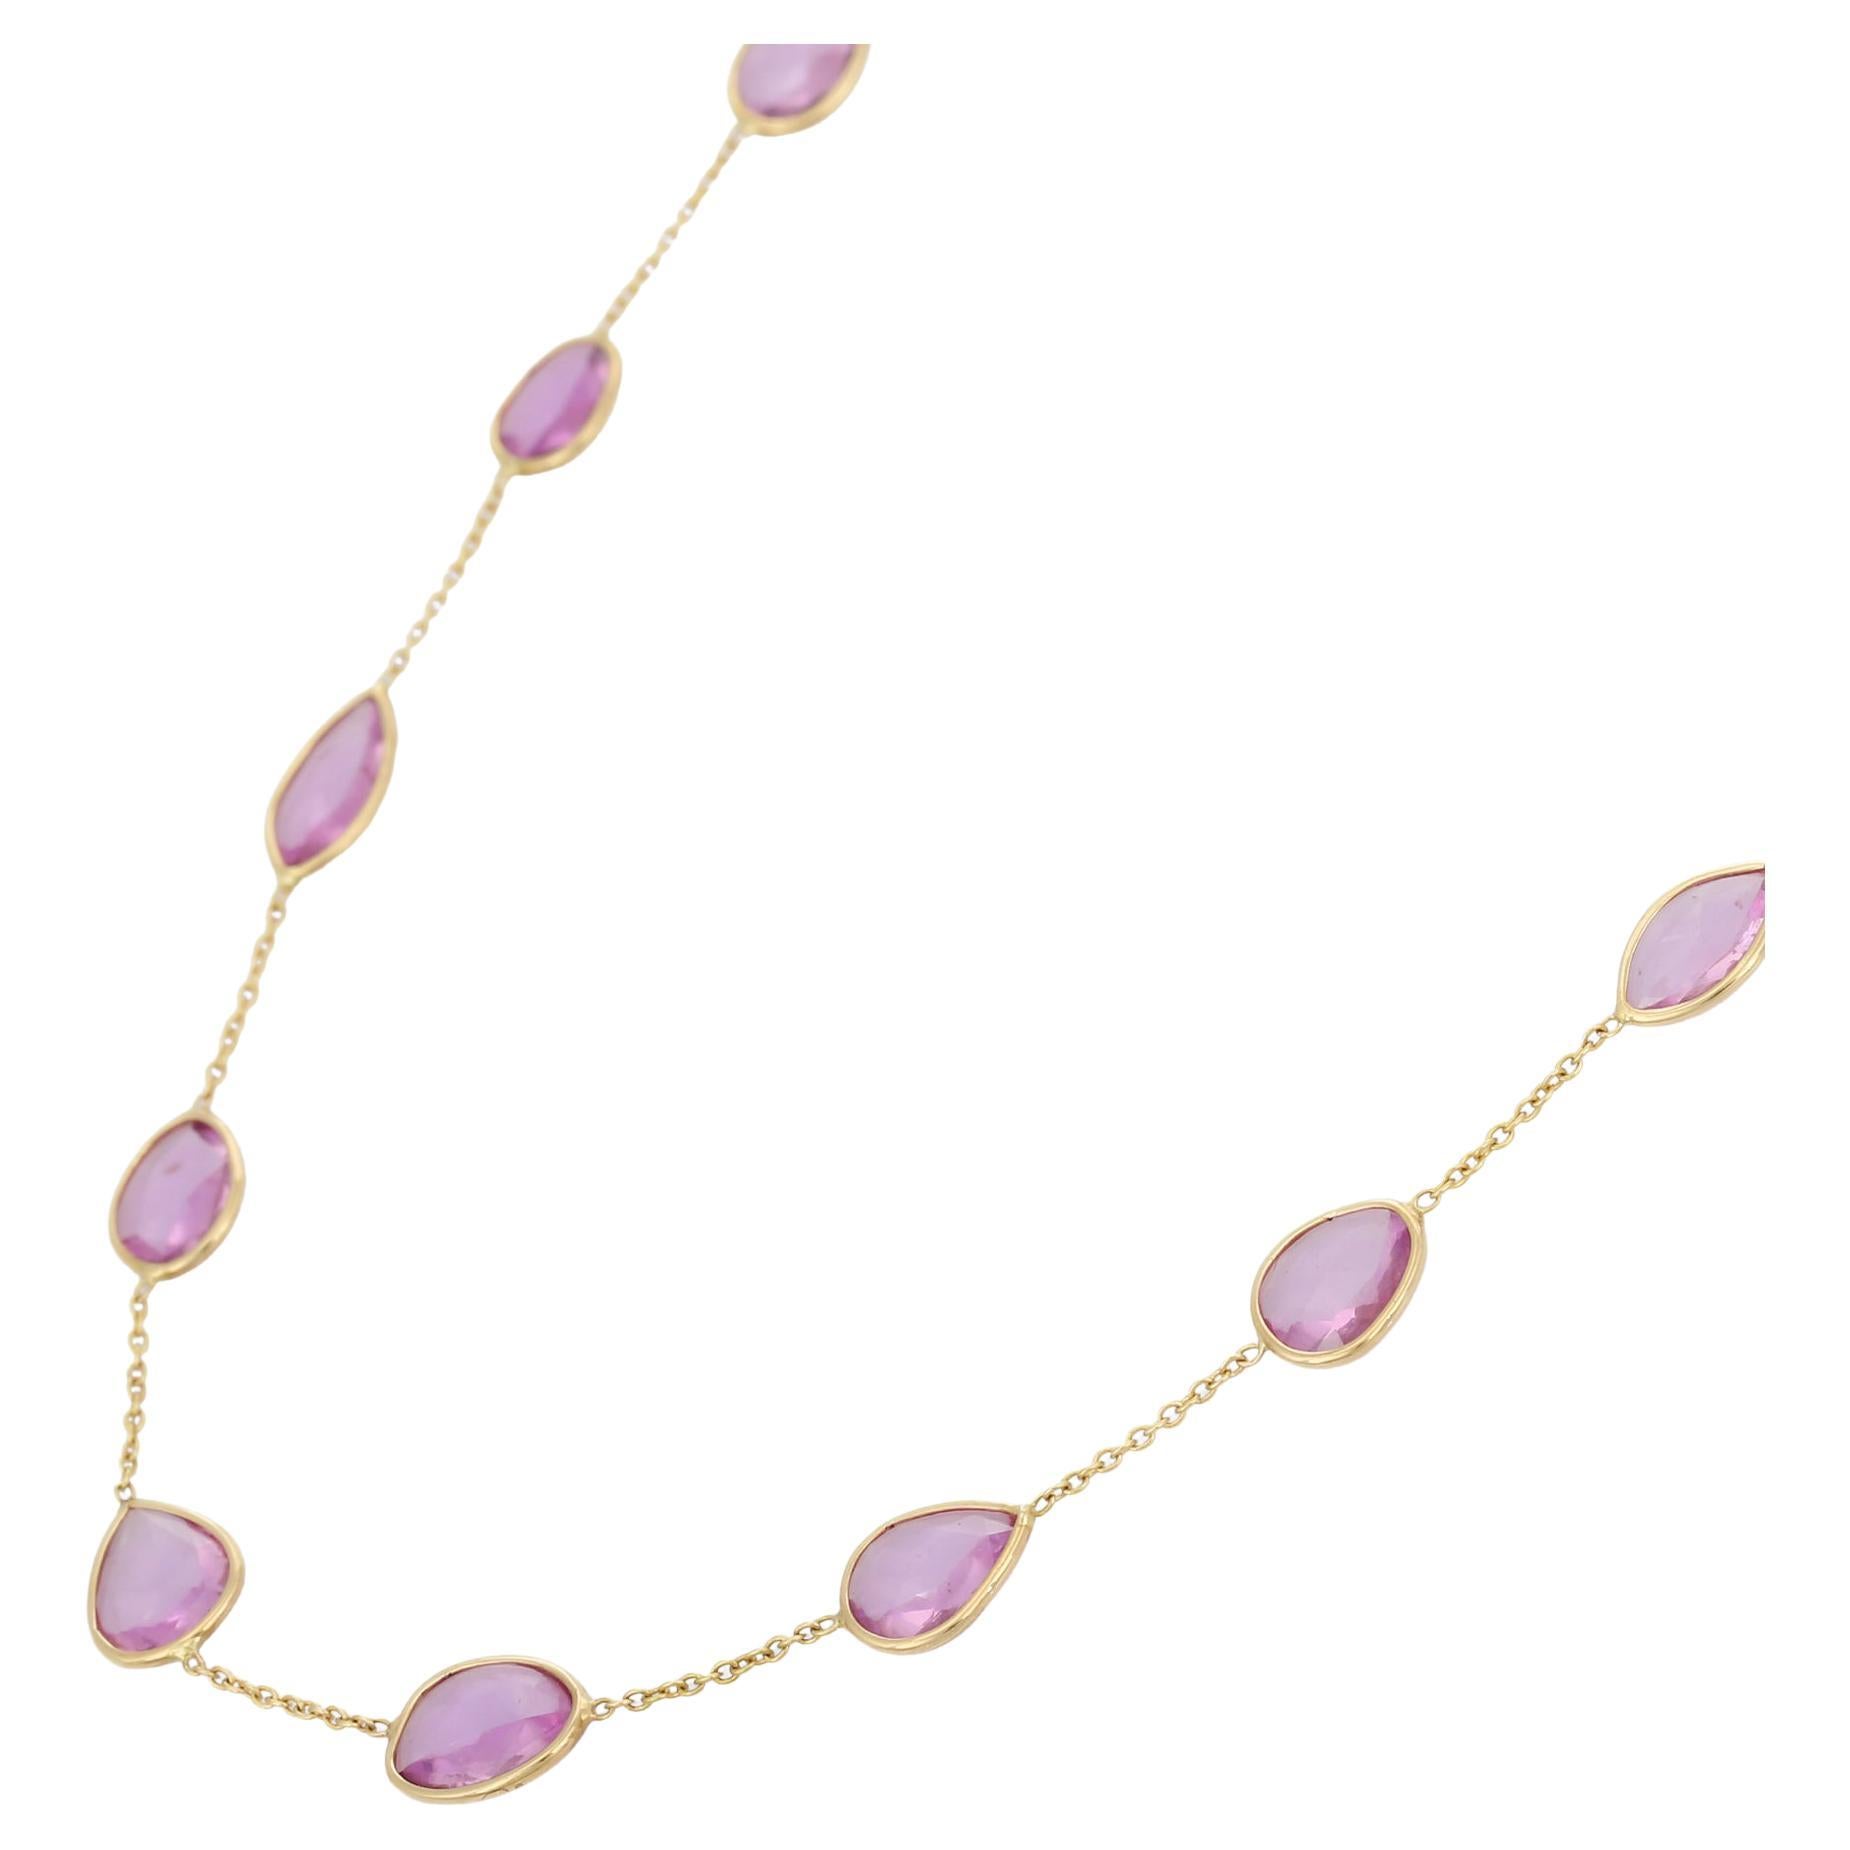 10.7 Carat Pink Sapphire Chain Necklace in 18K Yellow Gold For Sale